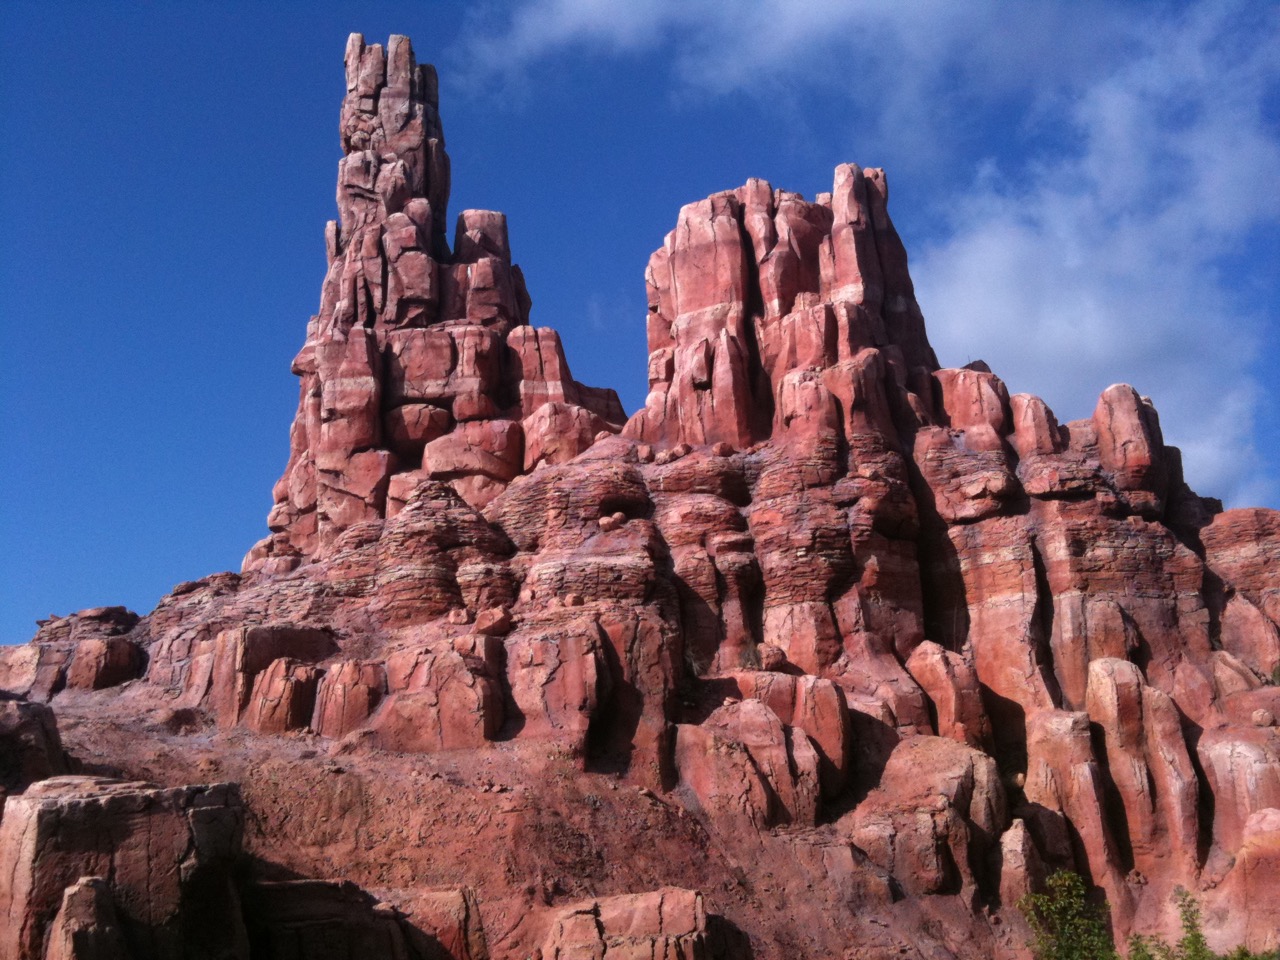 Big Thunder Mountain is intended for railroads, not canoes. Photo by J. Jeff Kober.